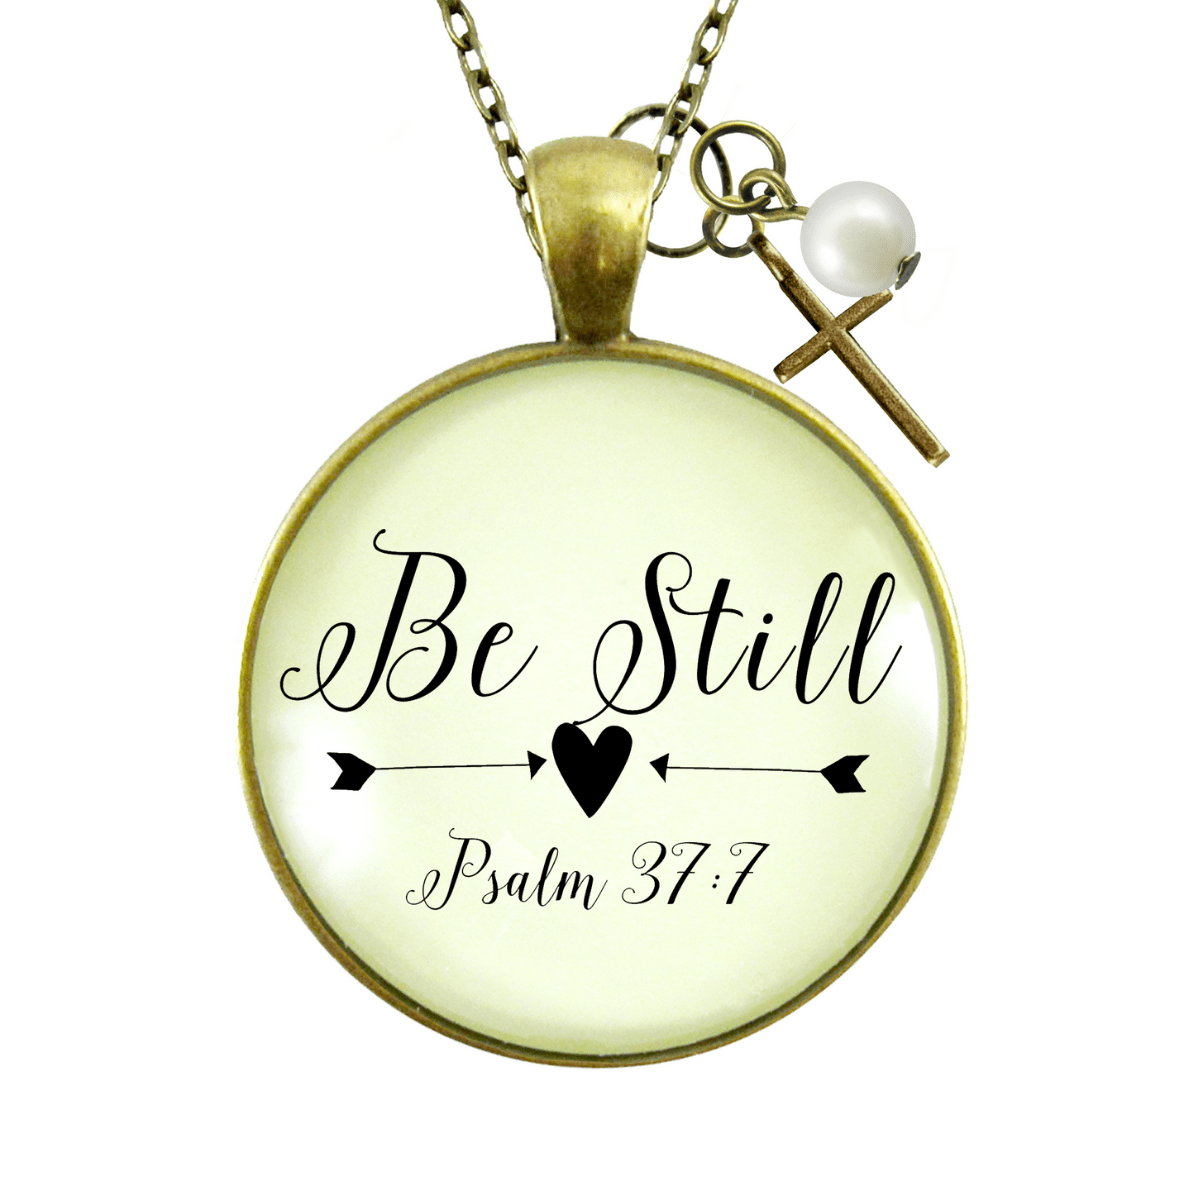 Gutsy Goodness Be Still Christian Inspired Necklace Faith Jewelry Life Cross Charm - Gutsy Goodness;Be Still Christian Inspired Necklace Faith Jewelry Life Cross Charm - Gutsy Goodness Handmade Jewelry Gifts